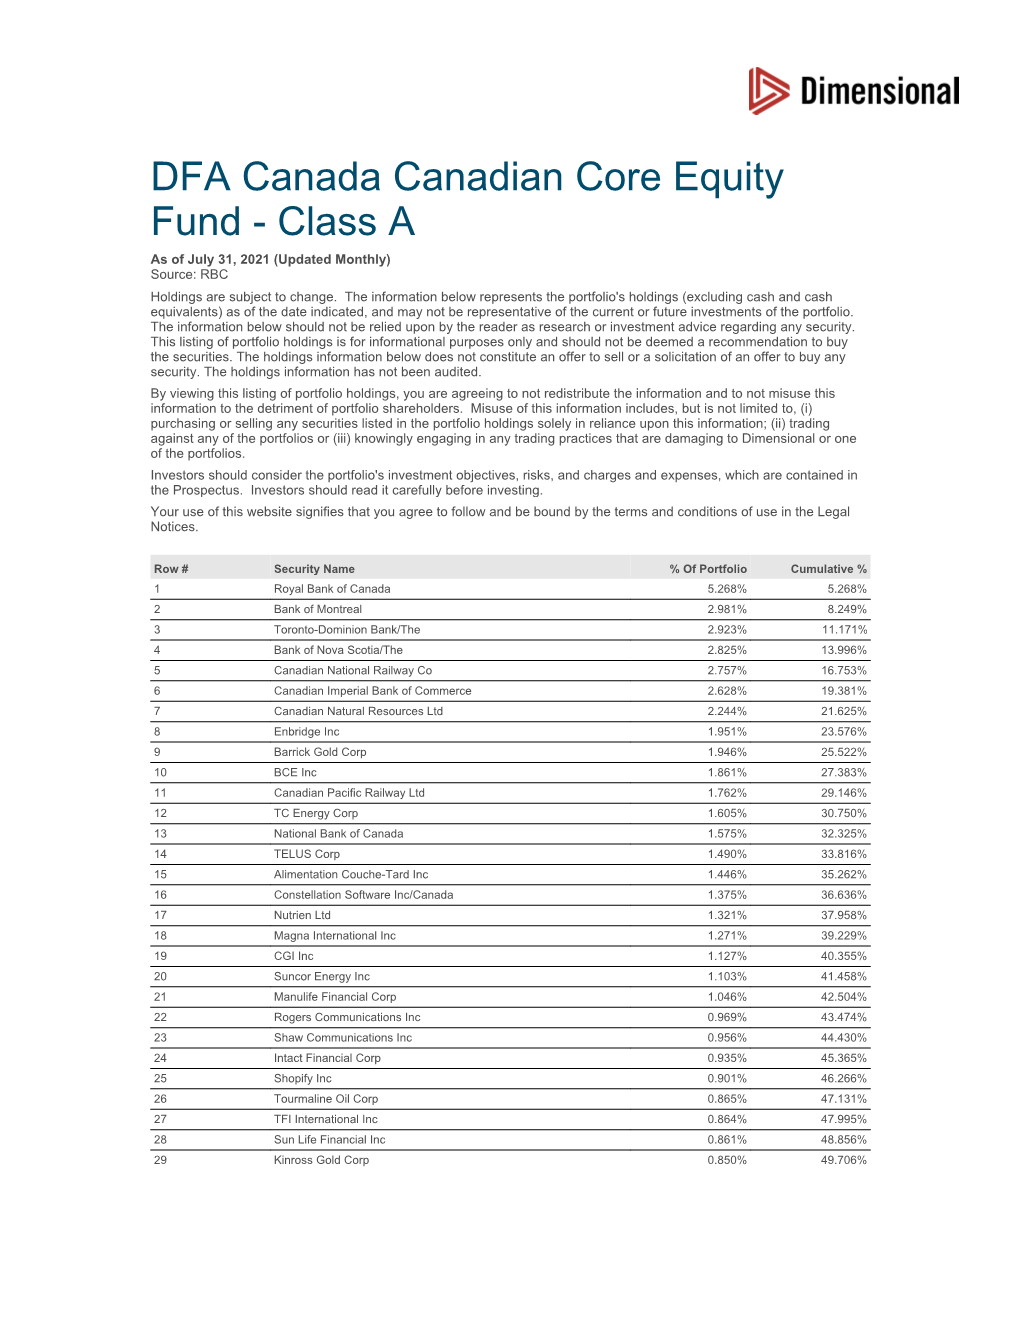 DFA Canada Canadian Core Equity Fund - Class a As of July 31, 2021 (Updated Monthly) Source: RBC Holdings Are Subject to Change